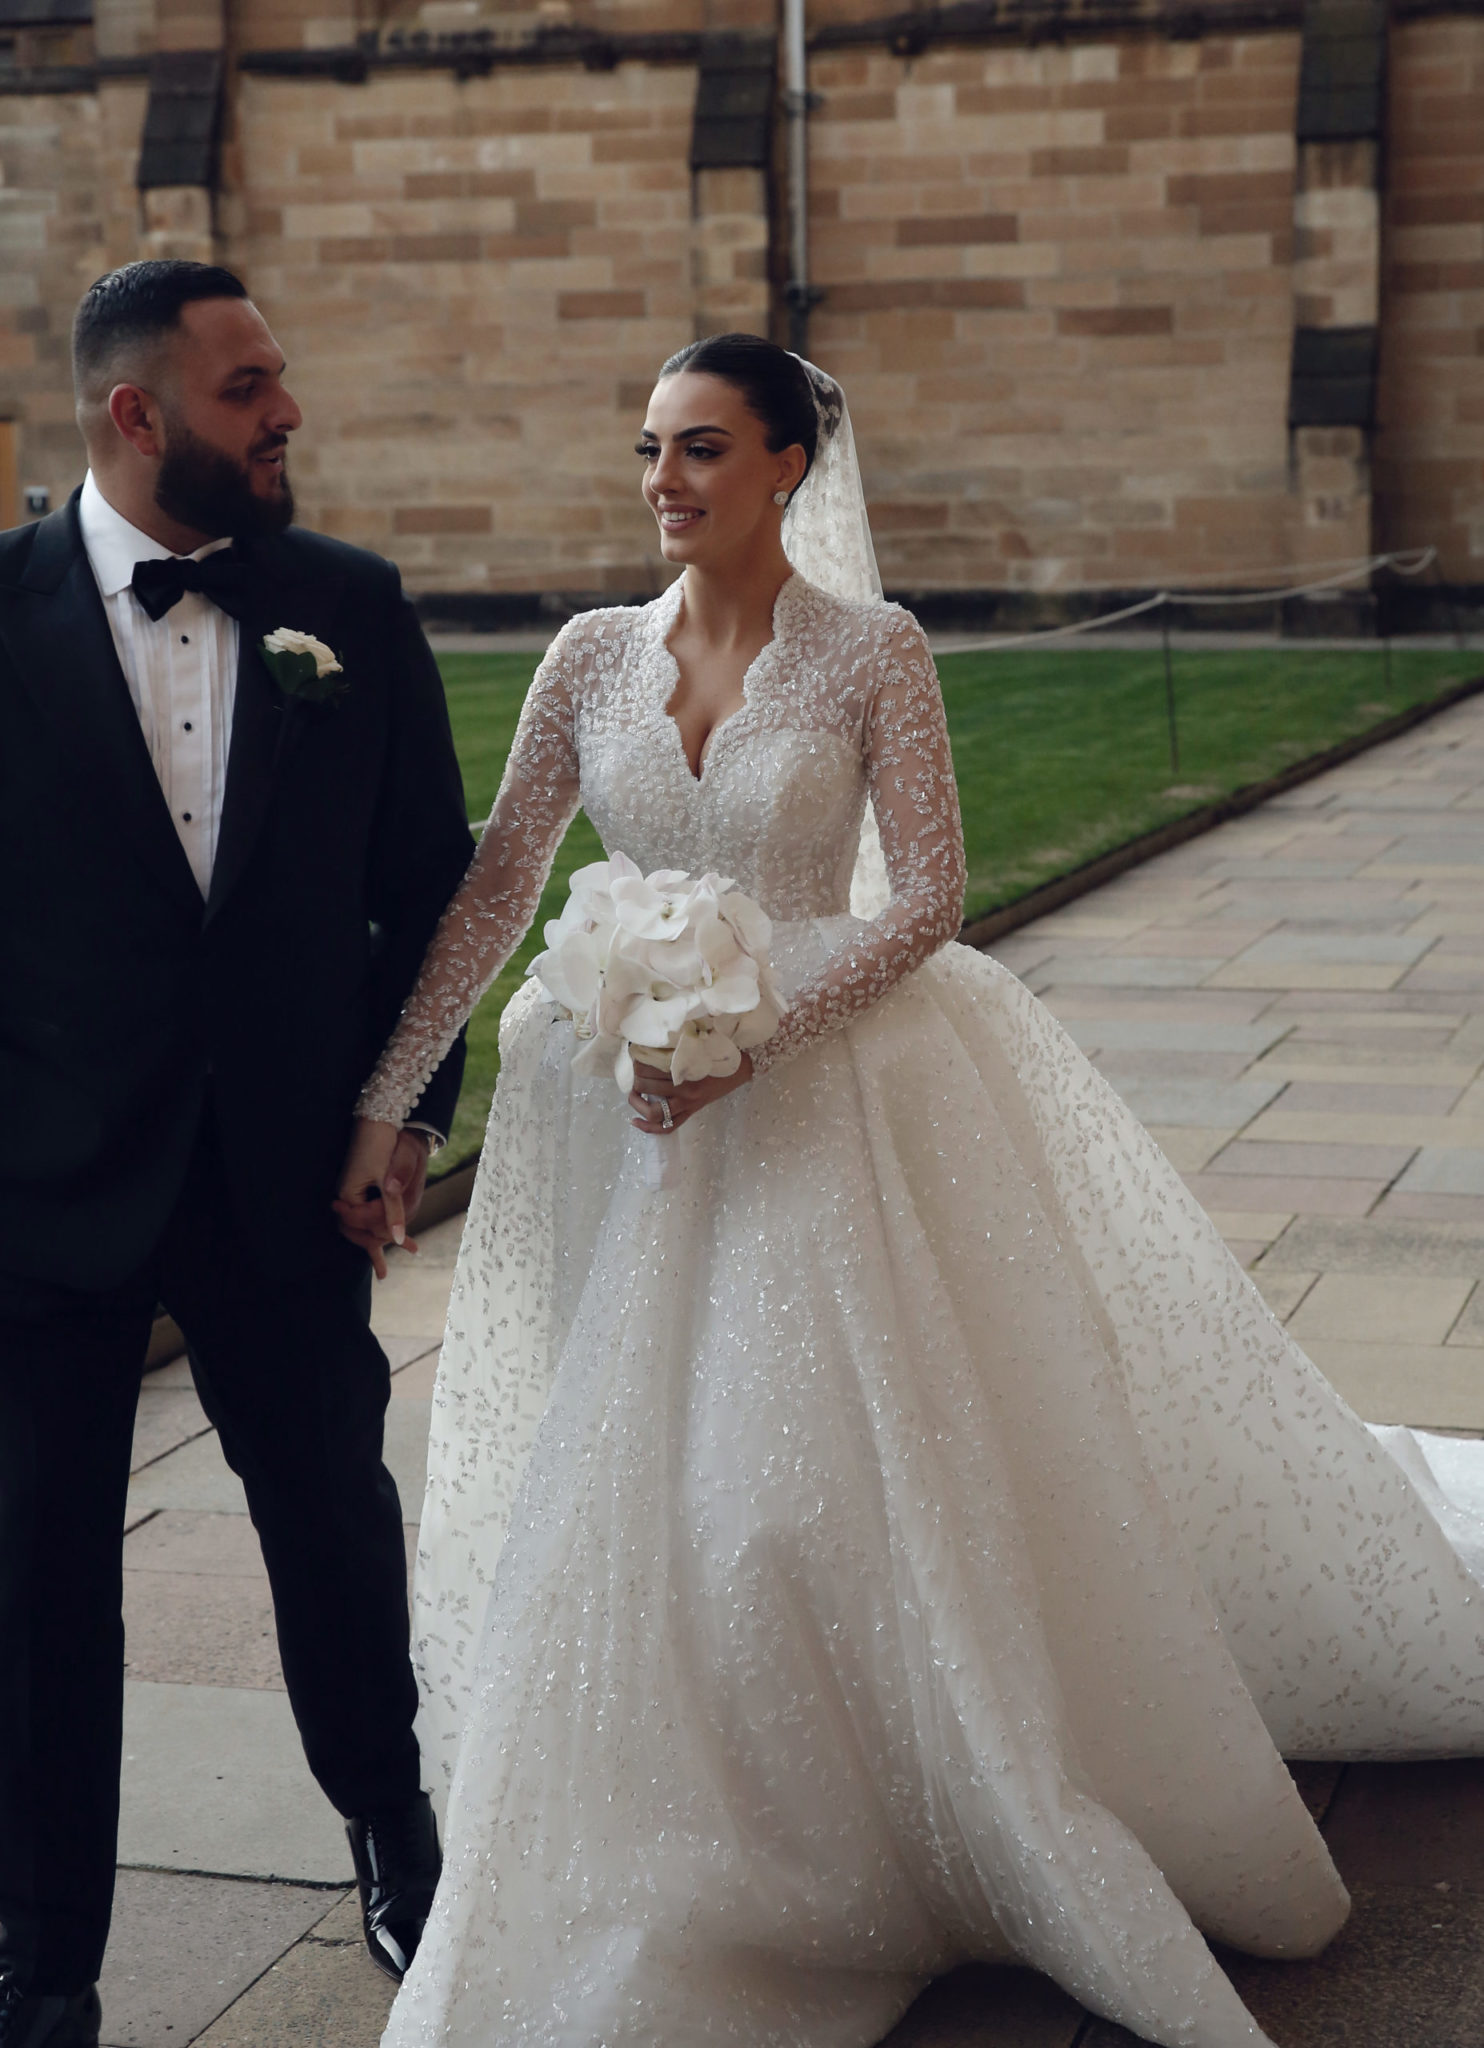 This Bride's Dress Was Inspired By Kate Middleton - Wedded Wonderland